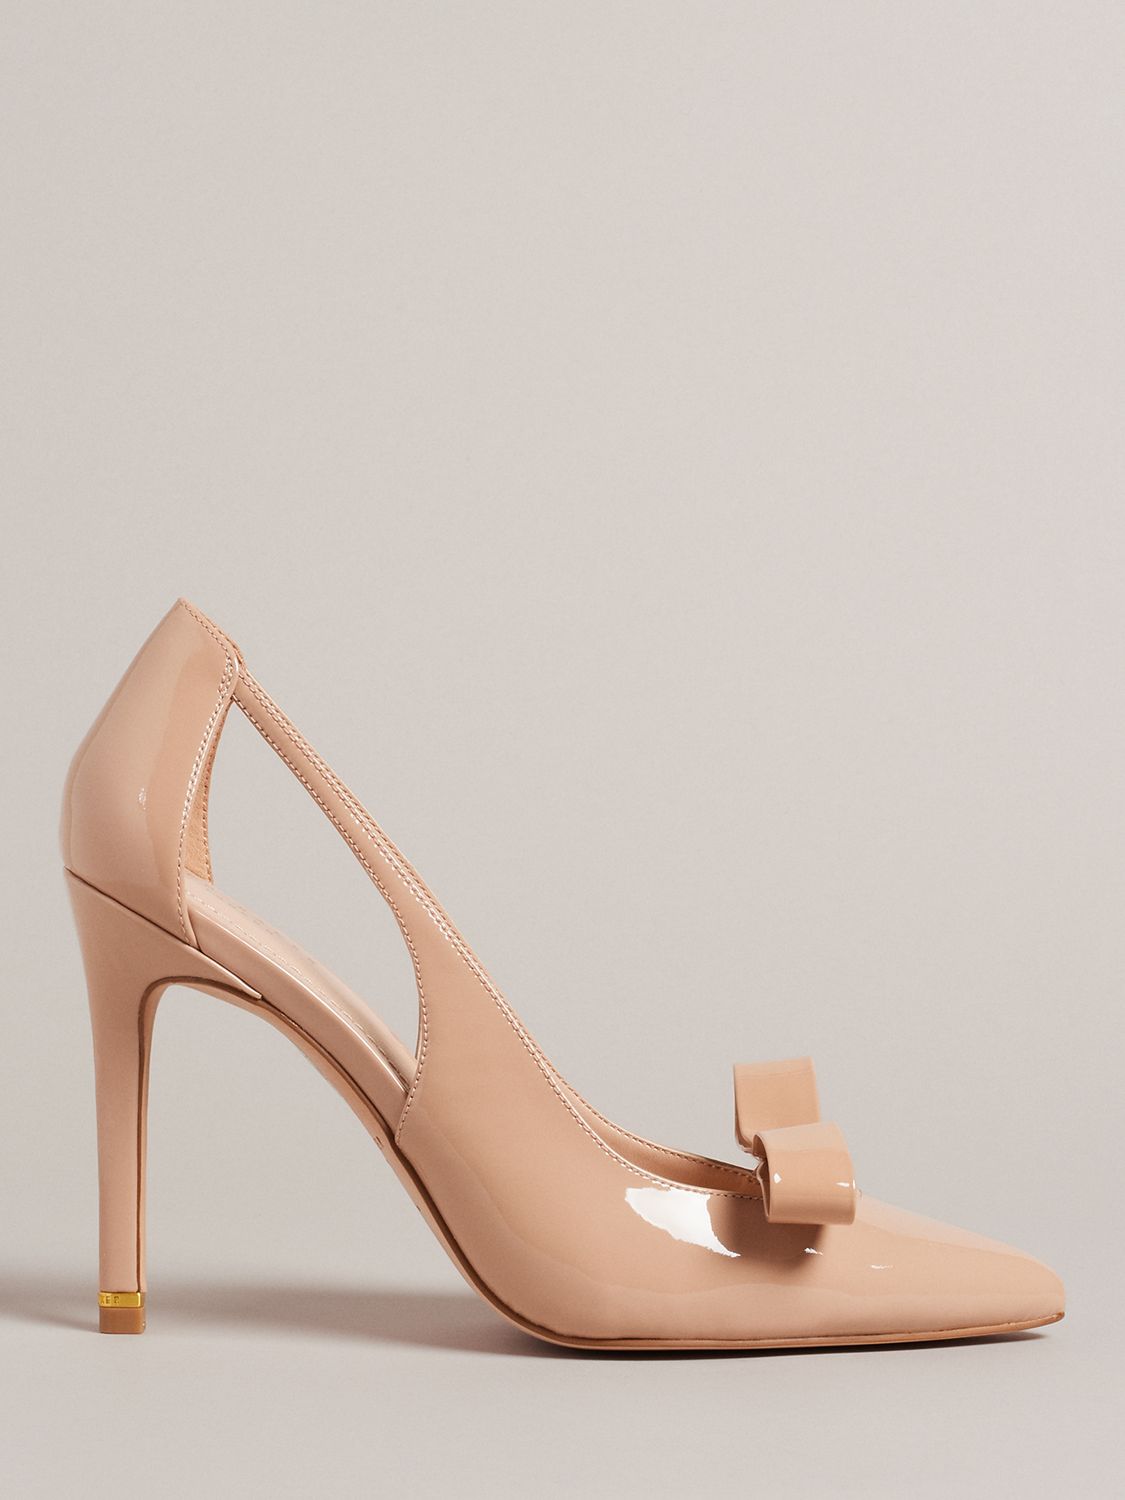 Ted Baker Orliney Patent Bow Cut Out Heeled Court Shoes, Nude, EU39